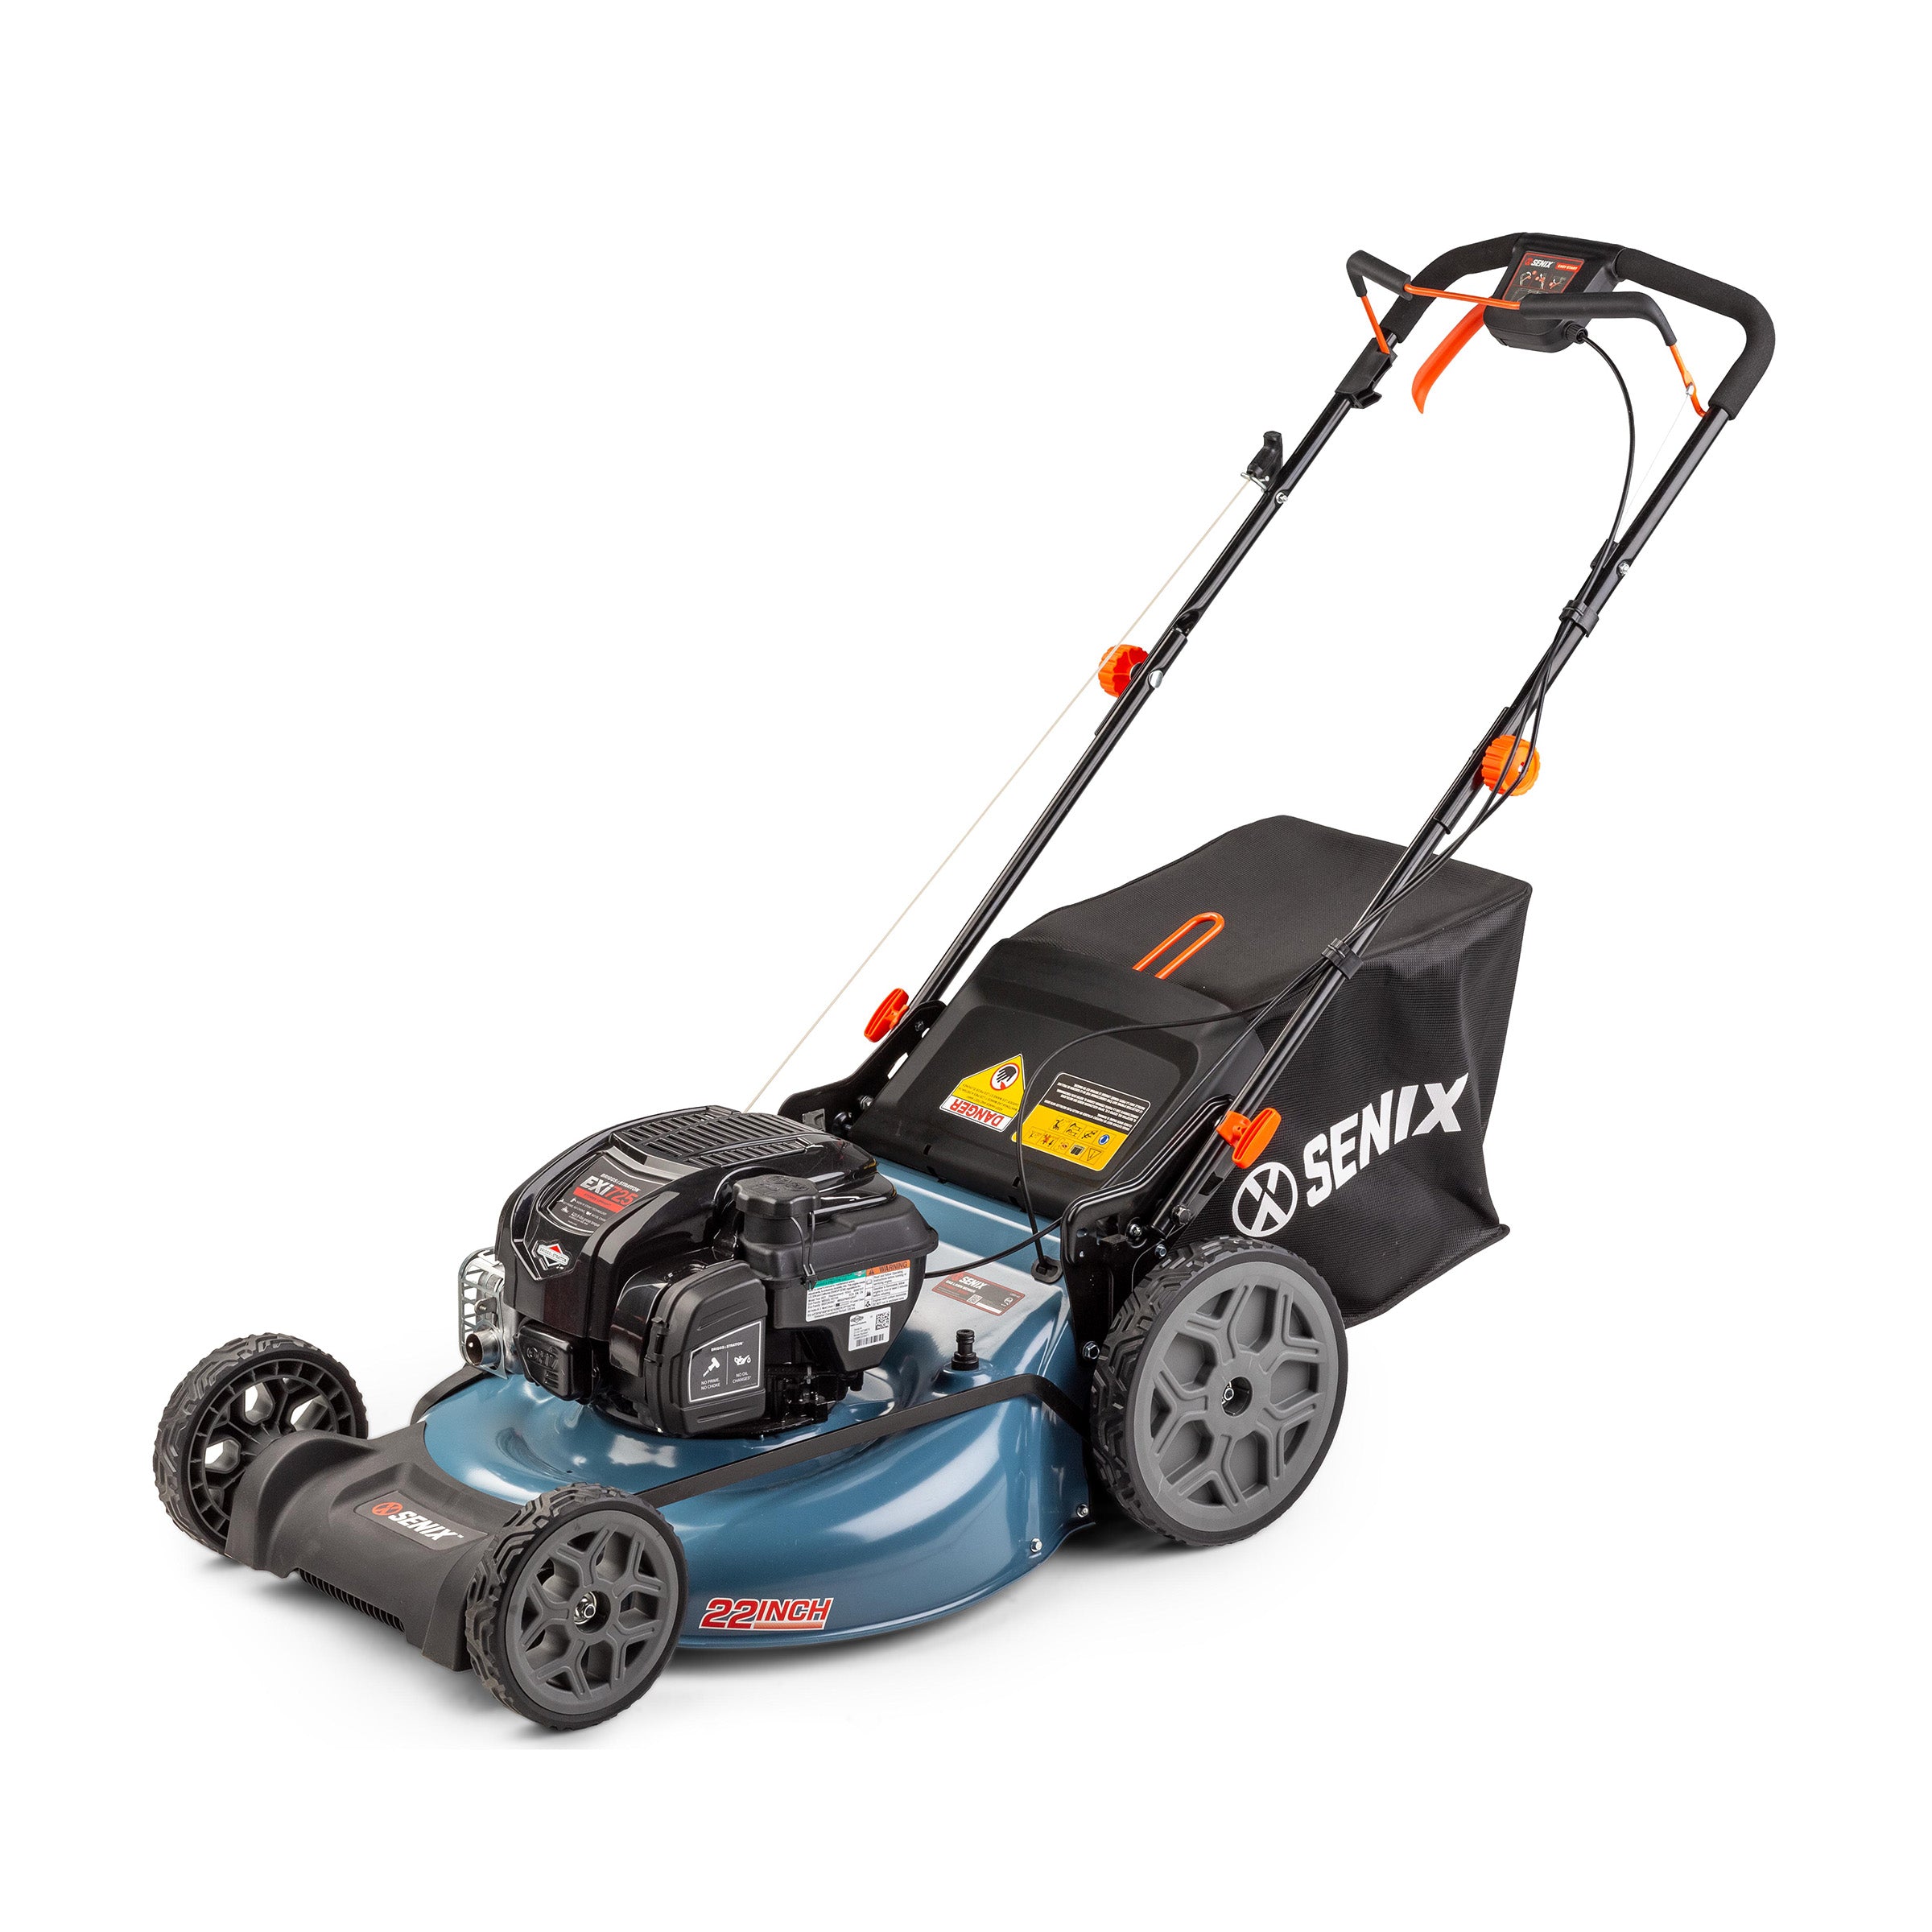 22-Inch 163 cc 4-Cycle Gas Powered Self-Propelled Lawn Mower, Variable